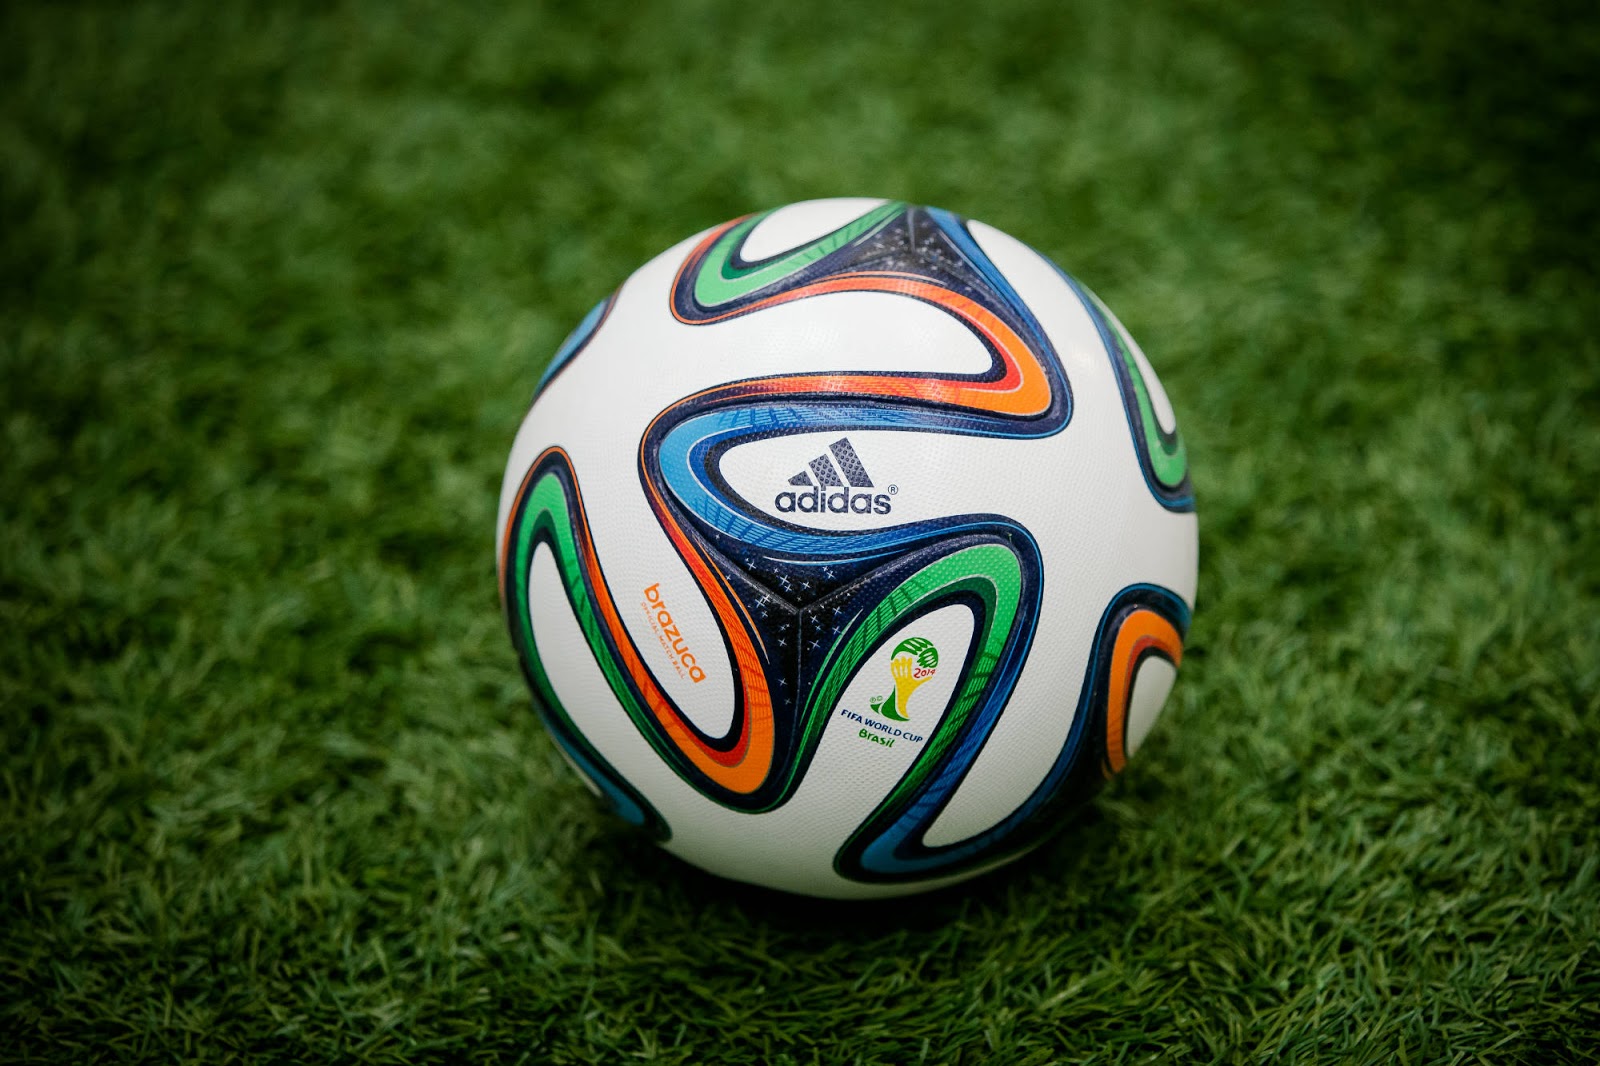 Adidas Brazuca: 2014 World Cup Ball Unveiled + Final Ball Leaked